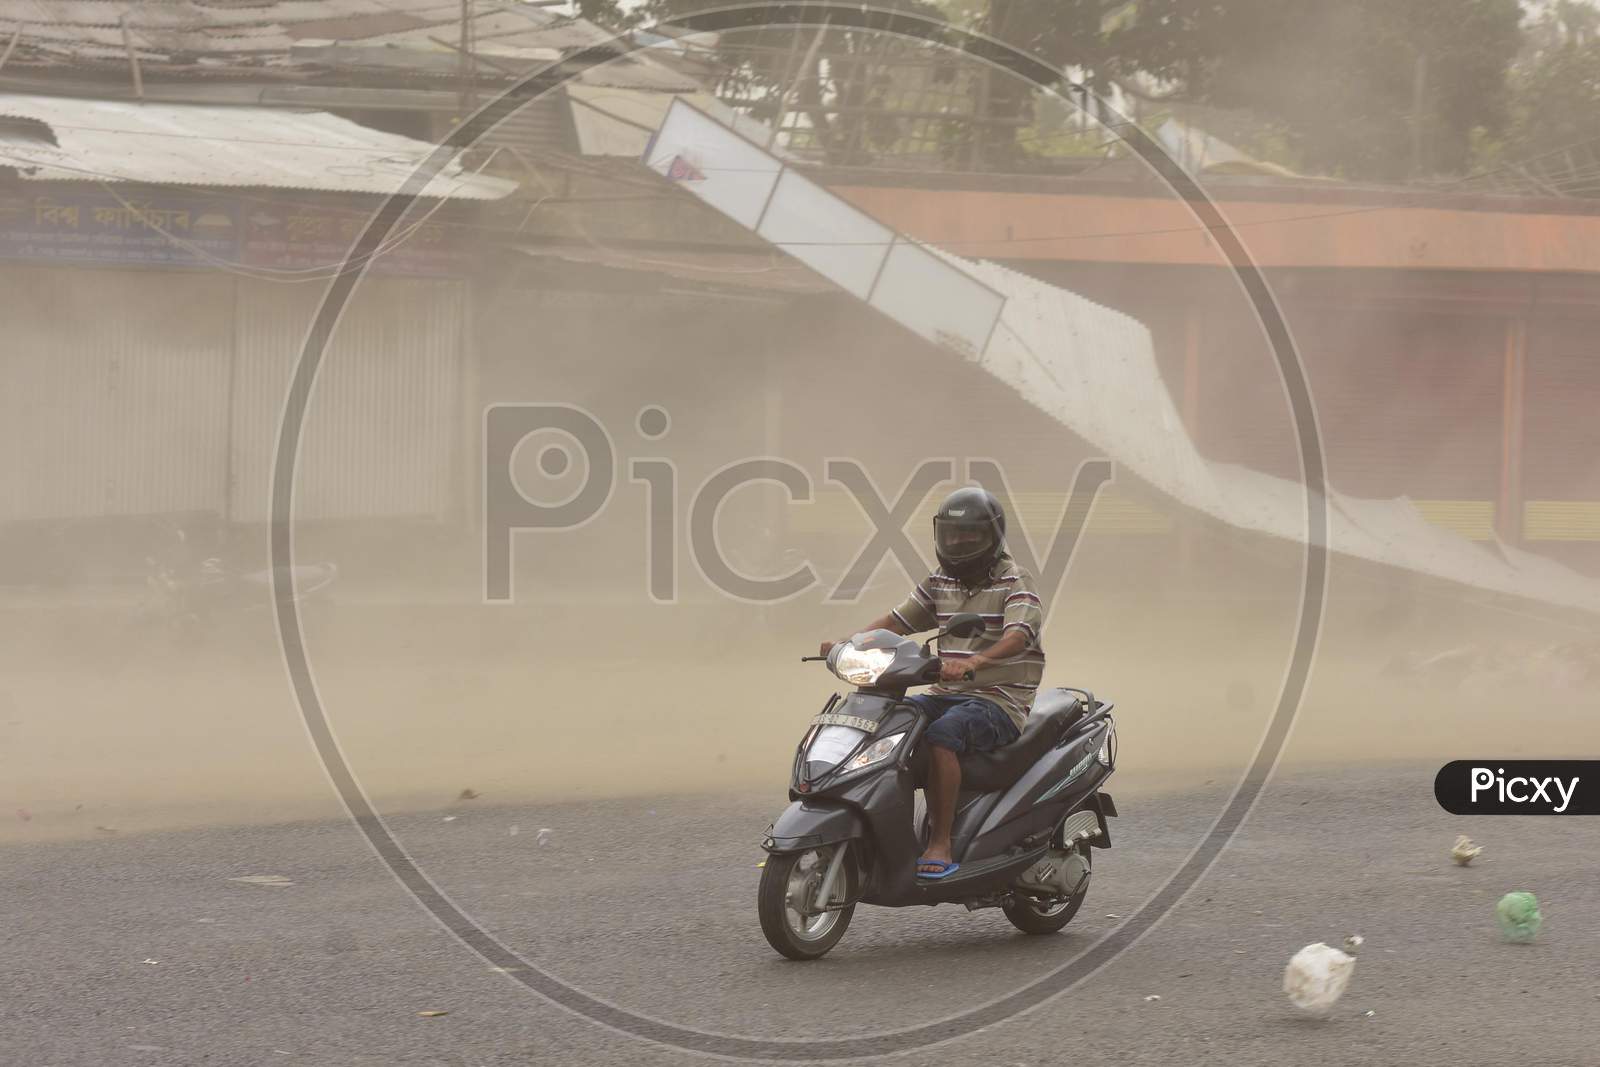 A Man Rides A Bike During Massive Dust Storm  During A Nationwide Lockdown In The Wake Of Corona virus or COVID-19 Pandemic, In  Nagaon District Of Assam On April 15,2020.